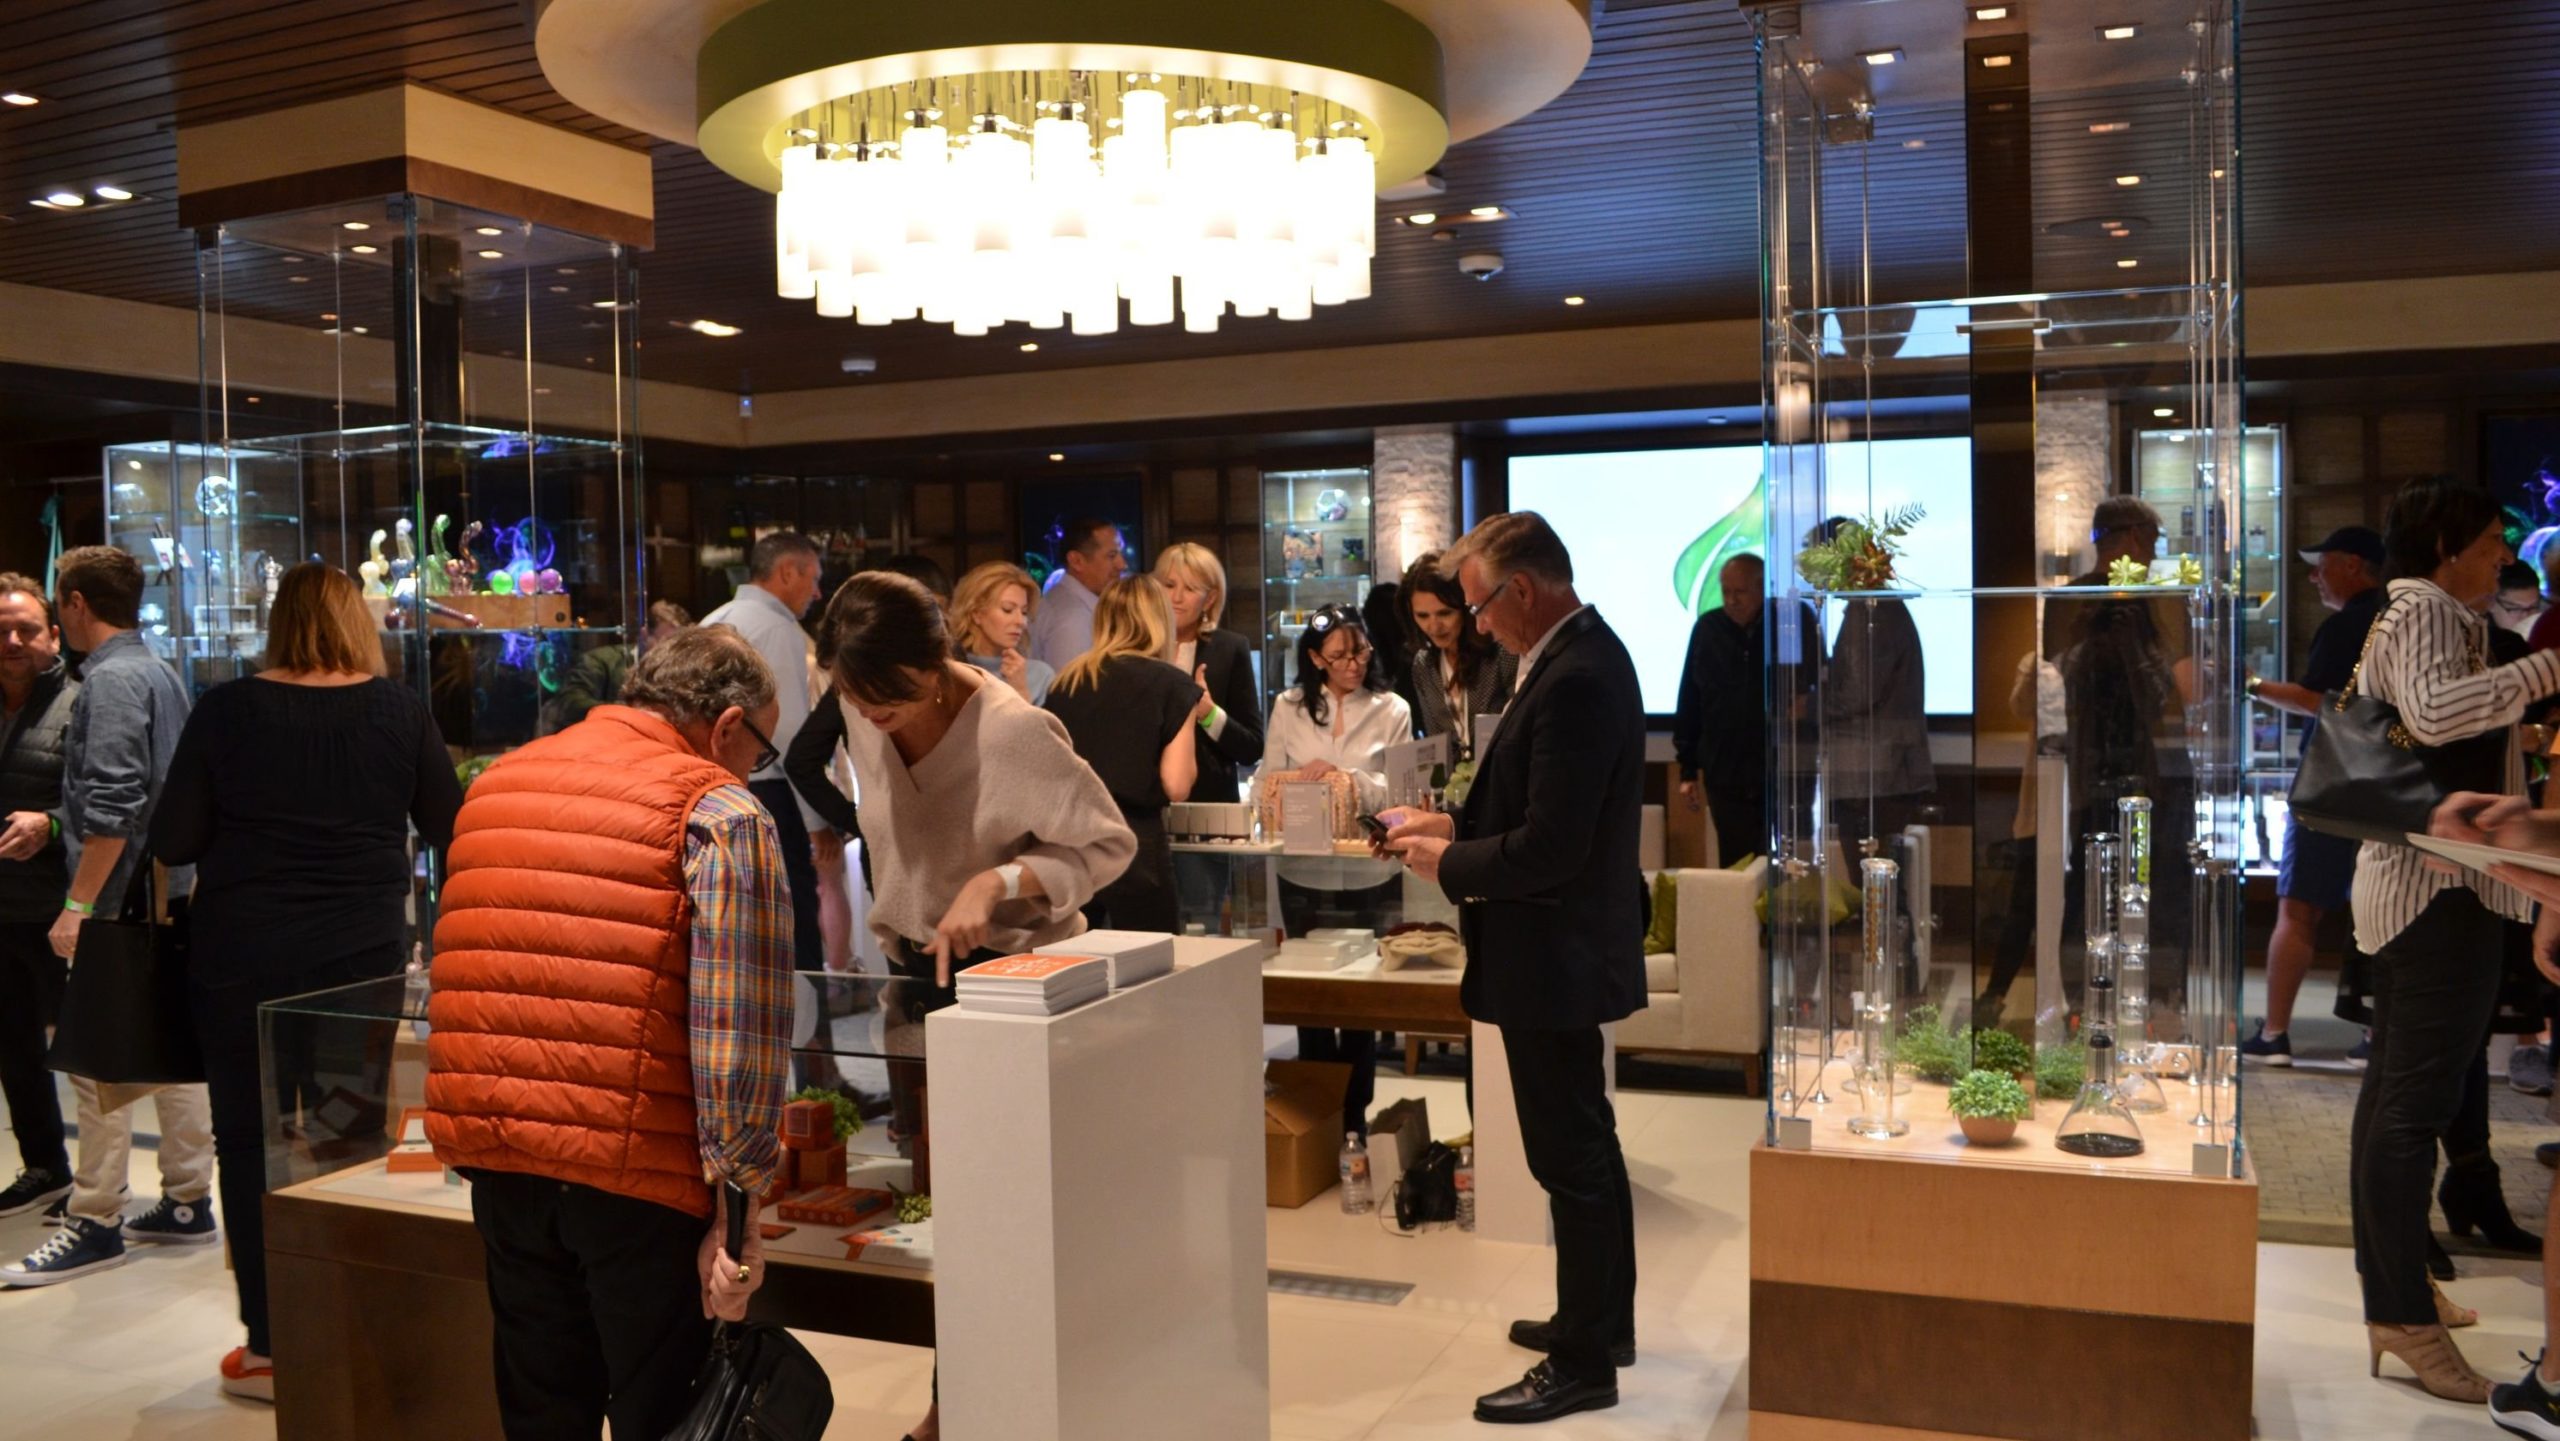 A pot shop opened in a posh California shopping district. Can it attract country club-goers?